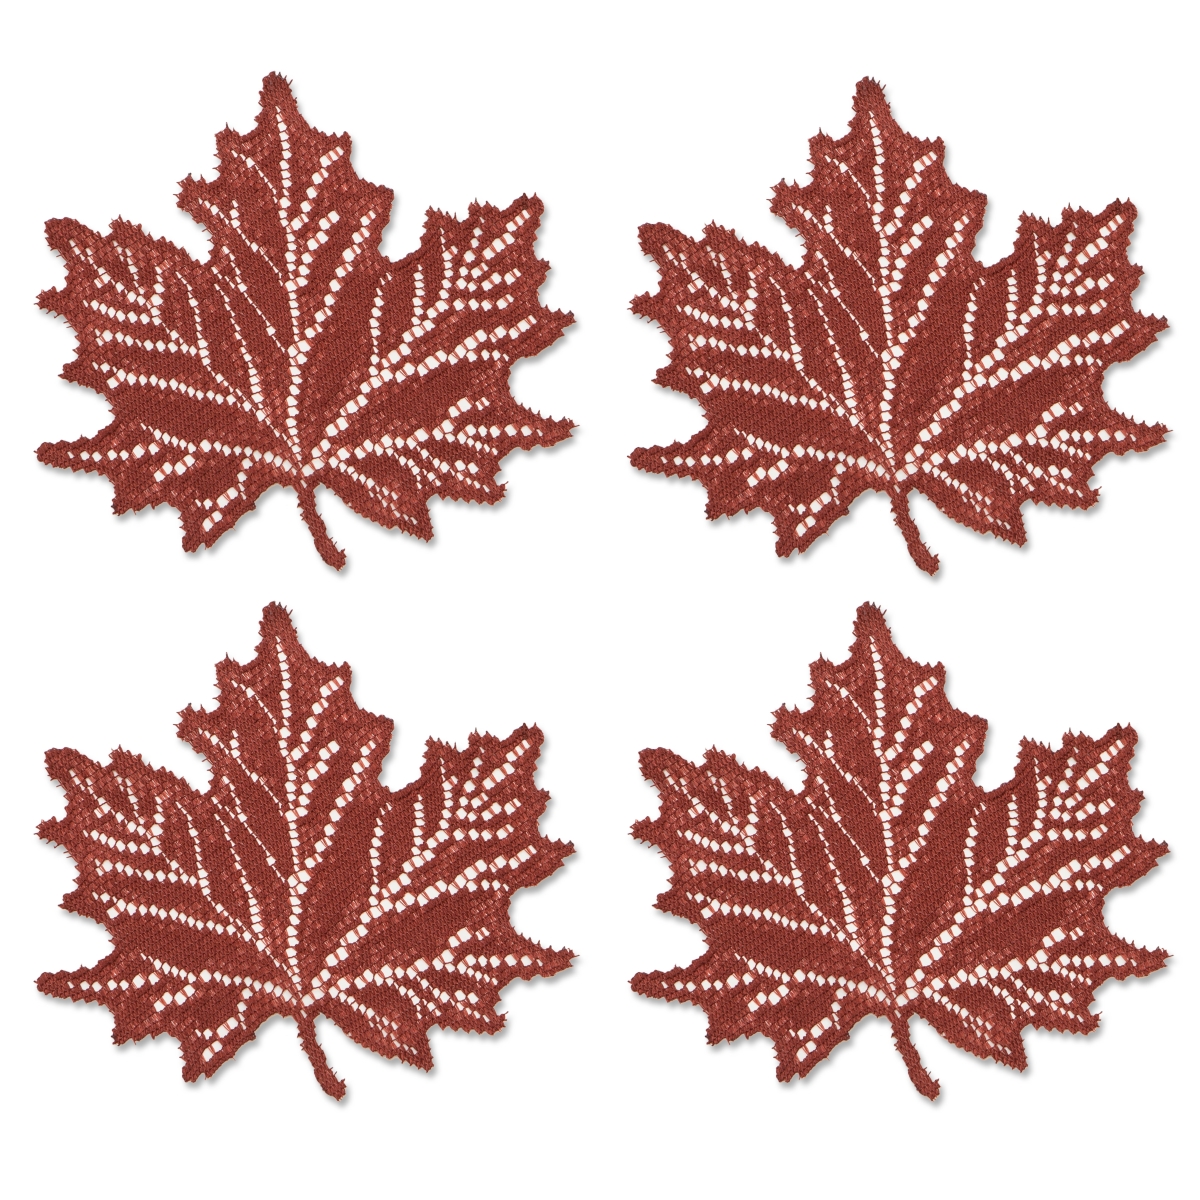 Picture of Heritage Lace MP-0708DP-S 7 x 8 in. Leaf Maple Doily - Dark Paprika - Set of 4